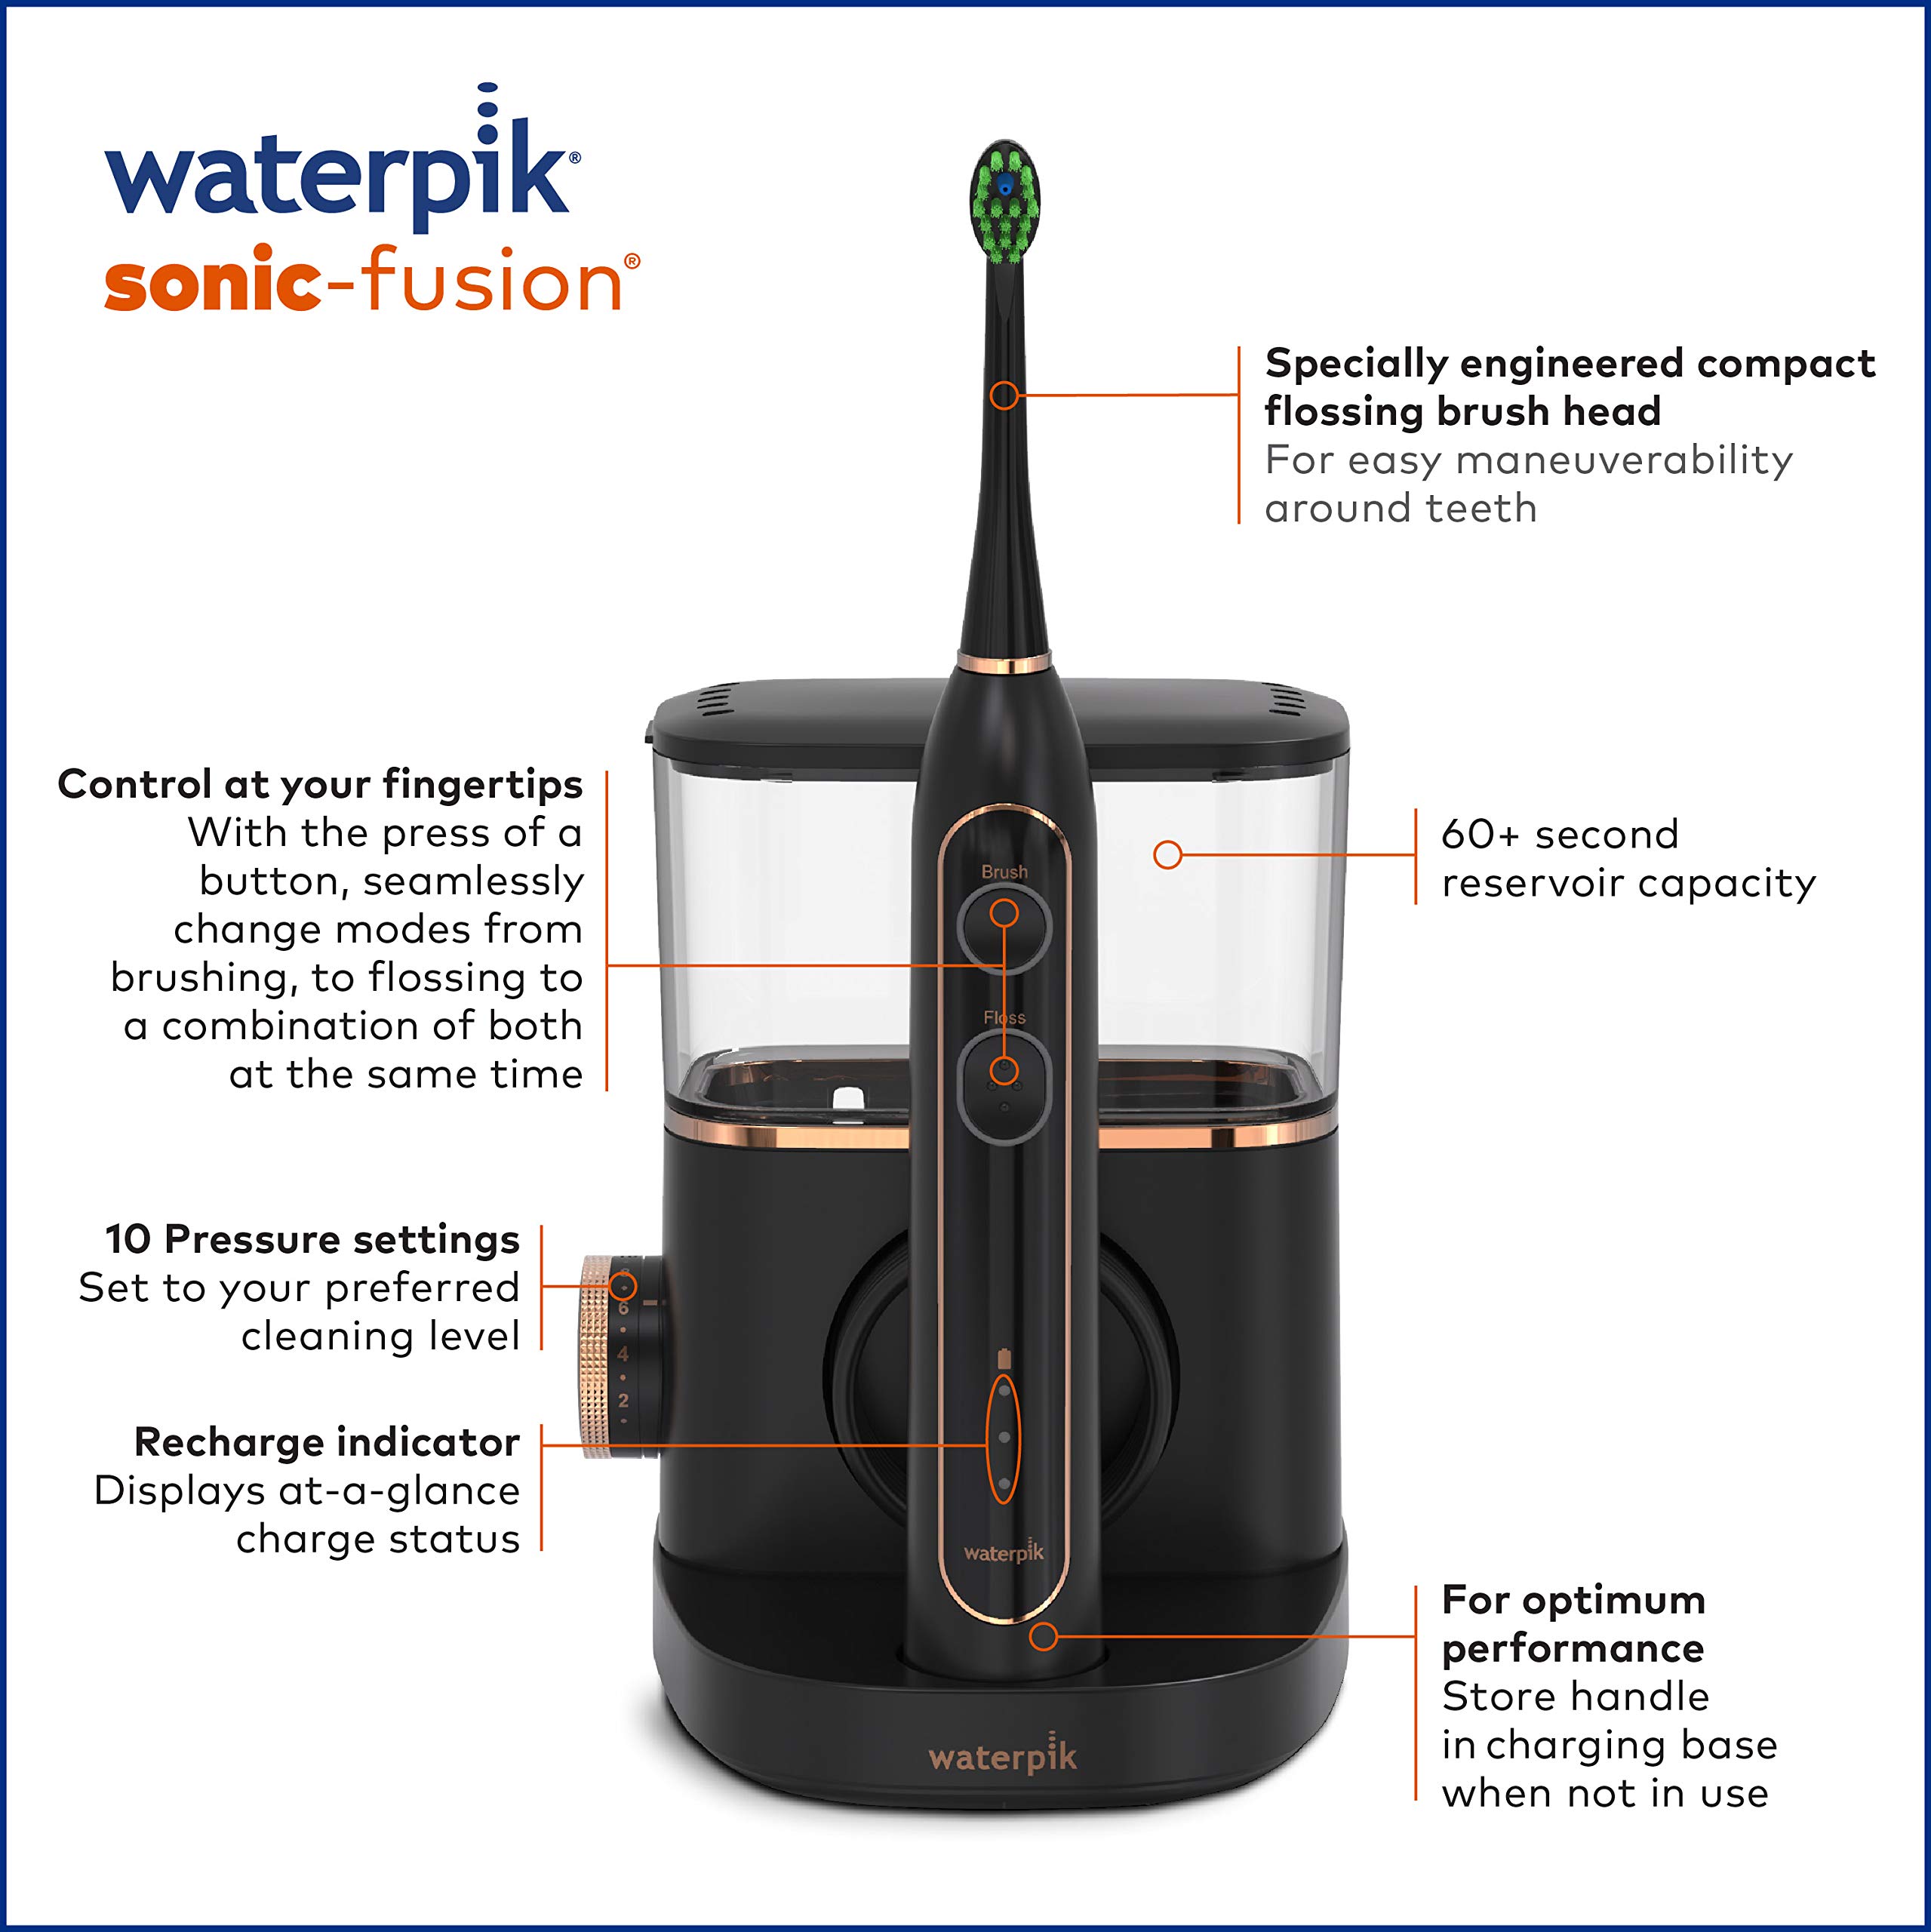 Waterpik Sonic-Fusion Professional Flossing Battery Powered Electric Toothbrush, Black, (Pack of 1)